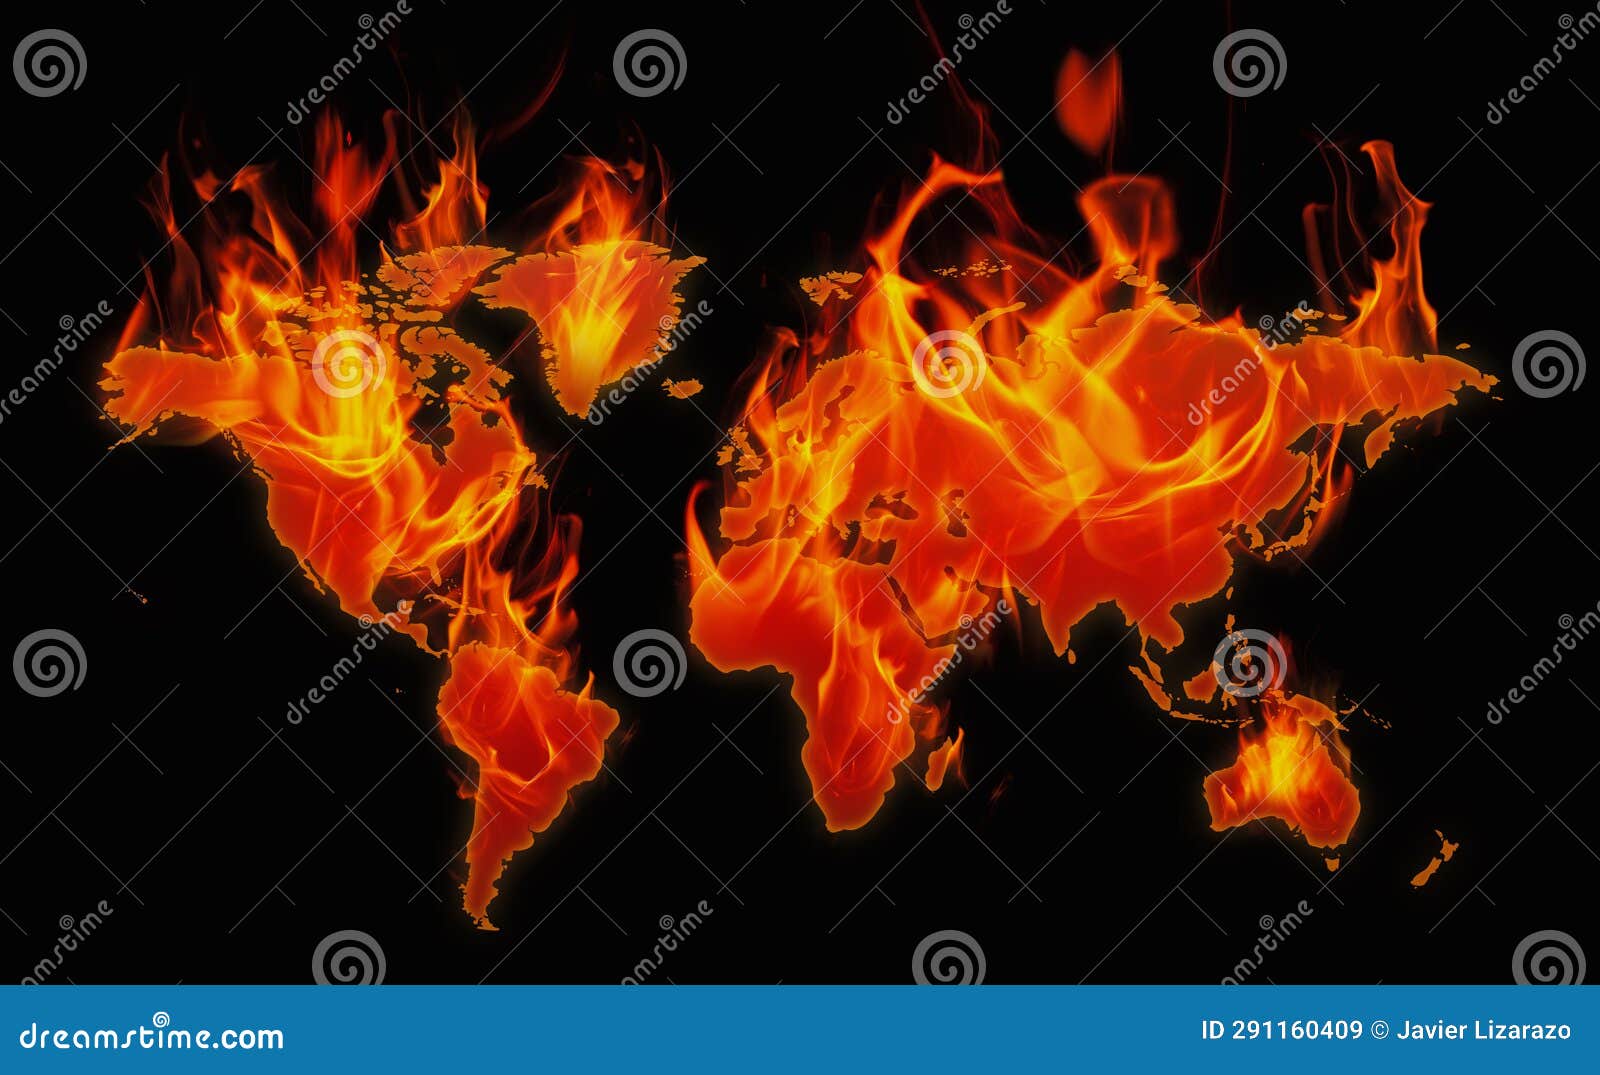 burning continents, world map on fire, conceptual image of world problems, global warming, war, insecurity - continentes ardiendo